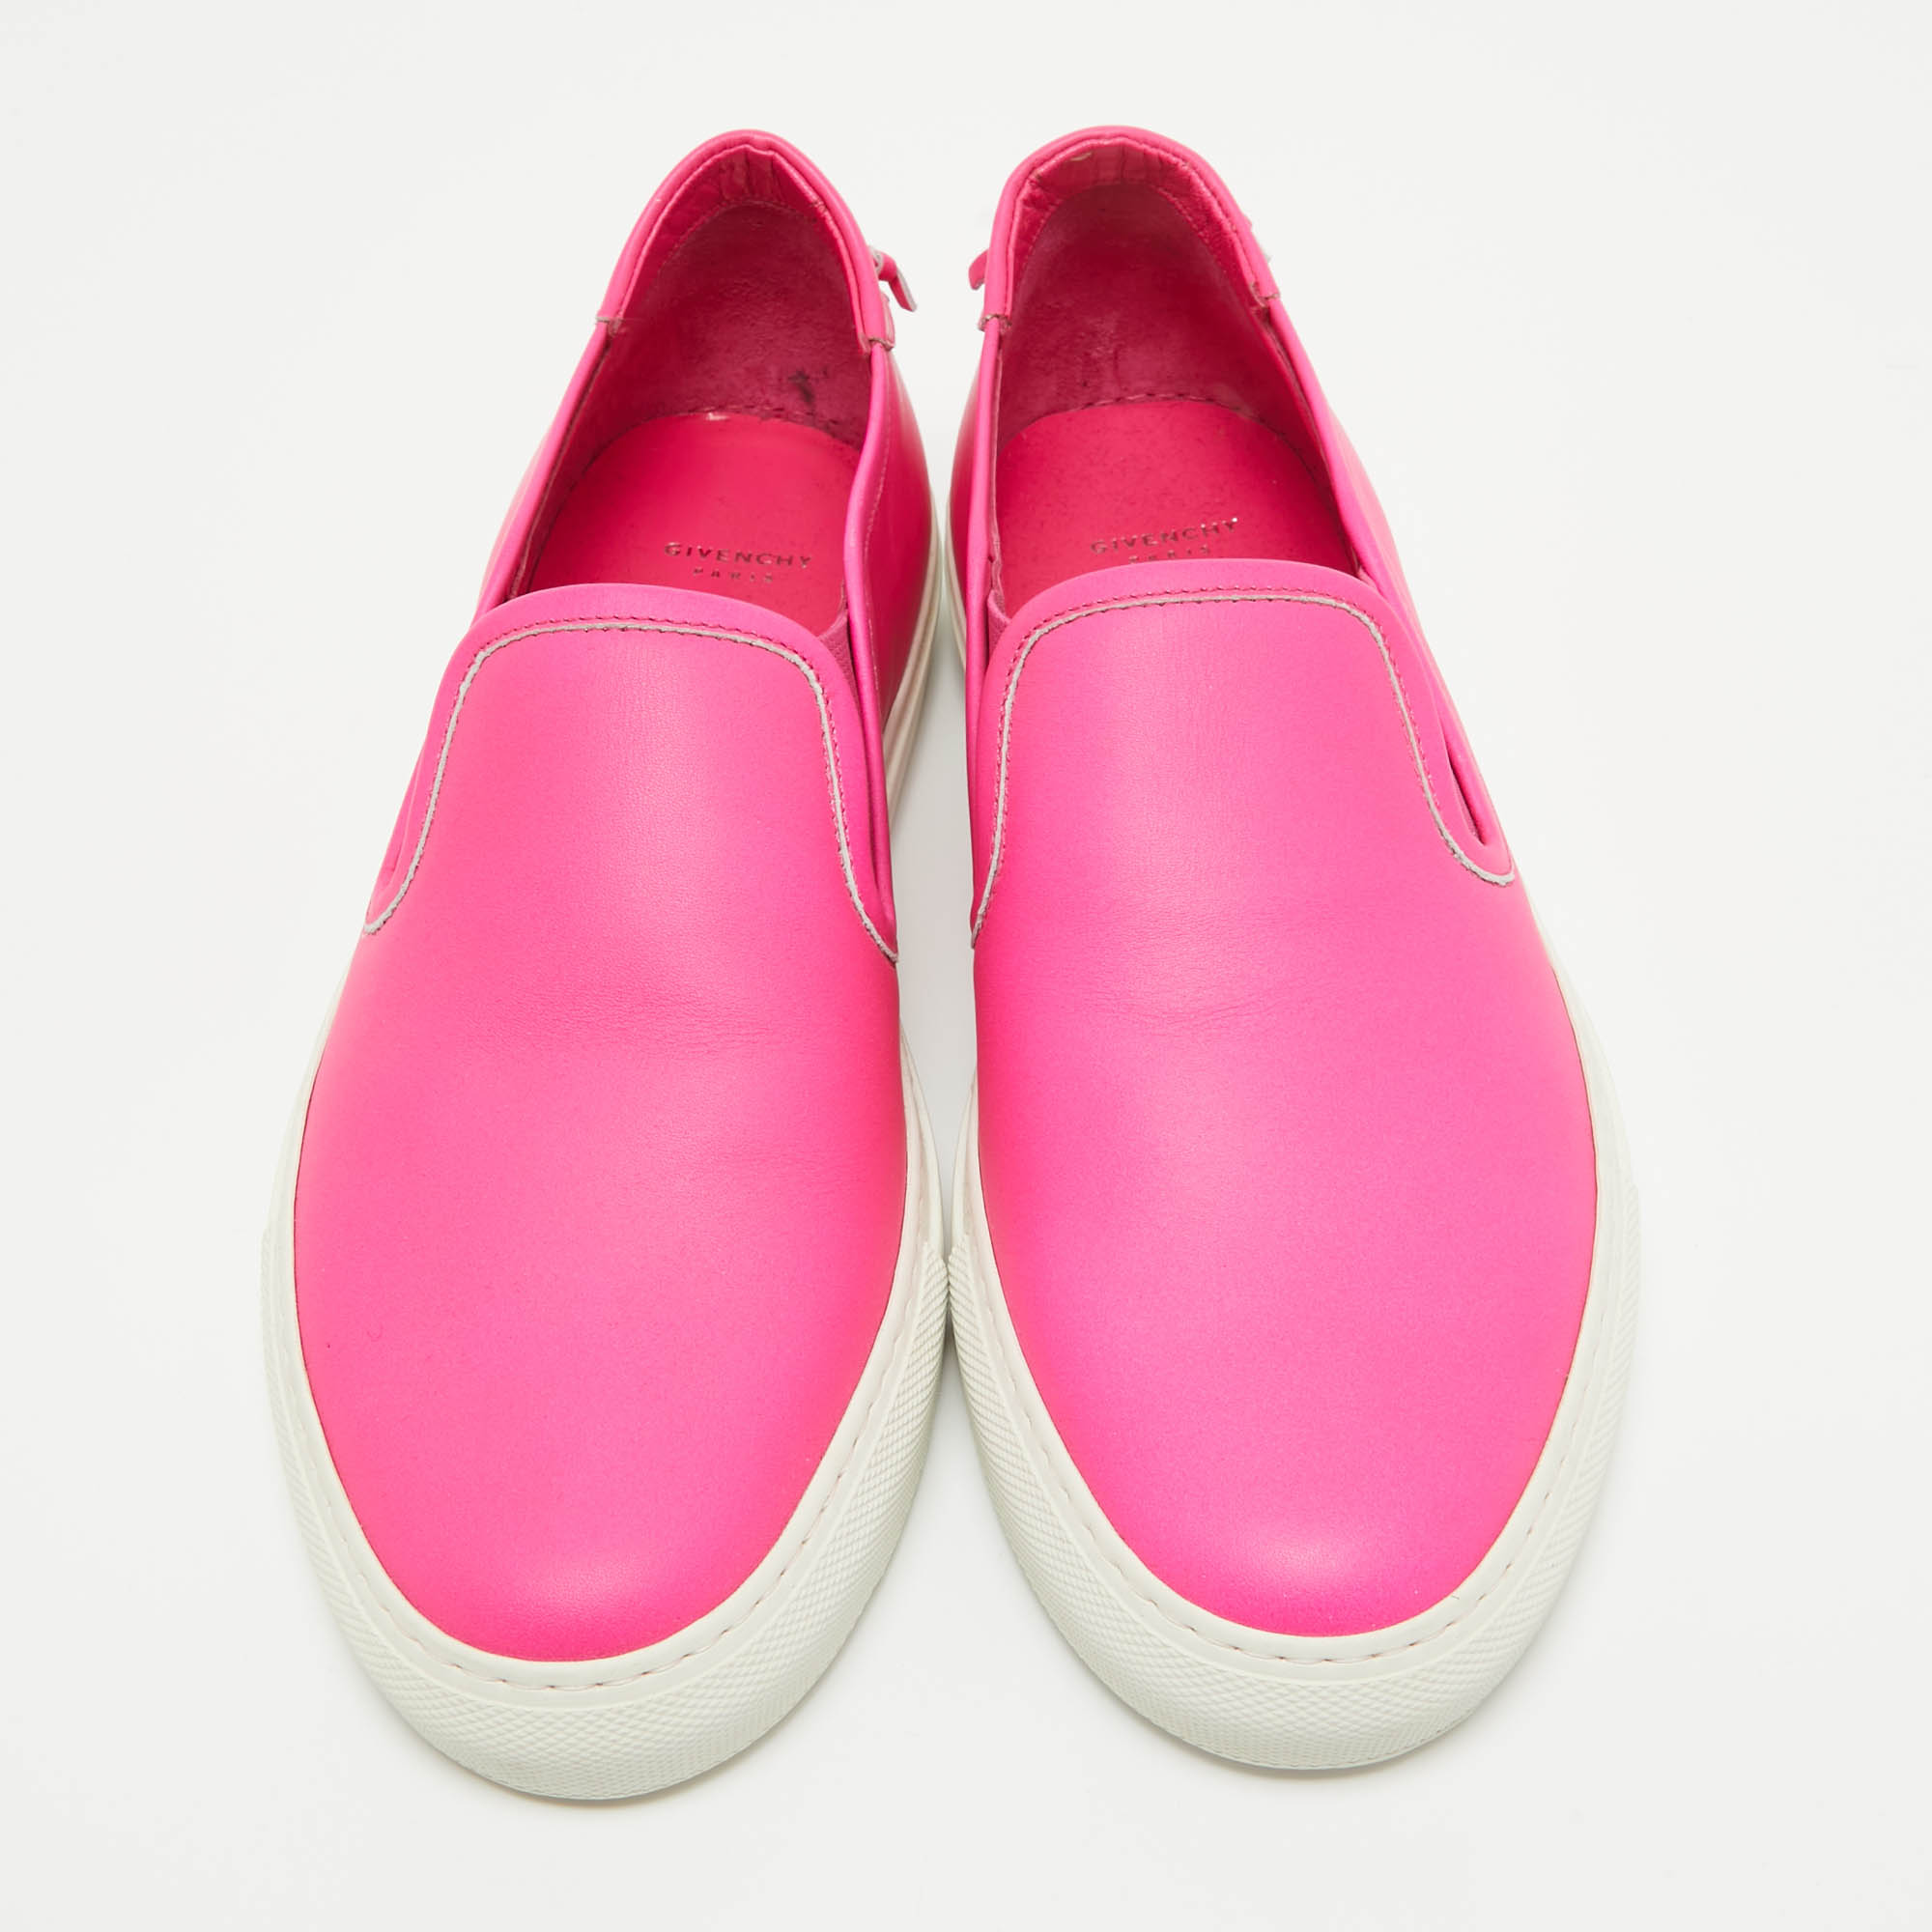 Givenchy Pink Leather Slip On Sneakers Size 40